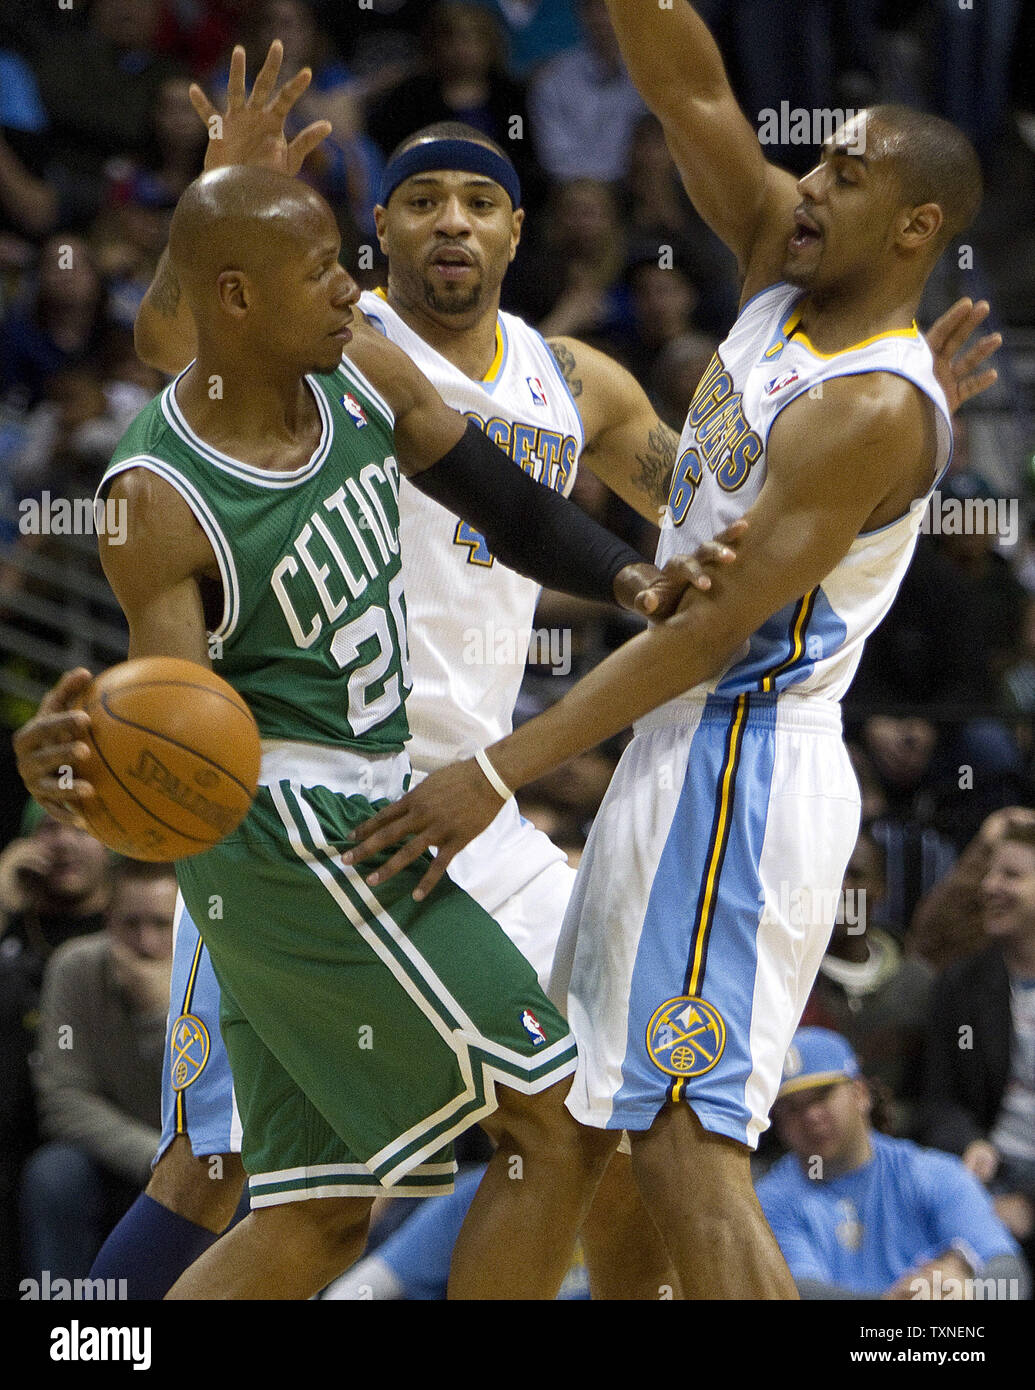 Ray Allen 2011-12 Action Photo 8 x 10in